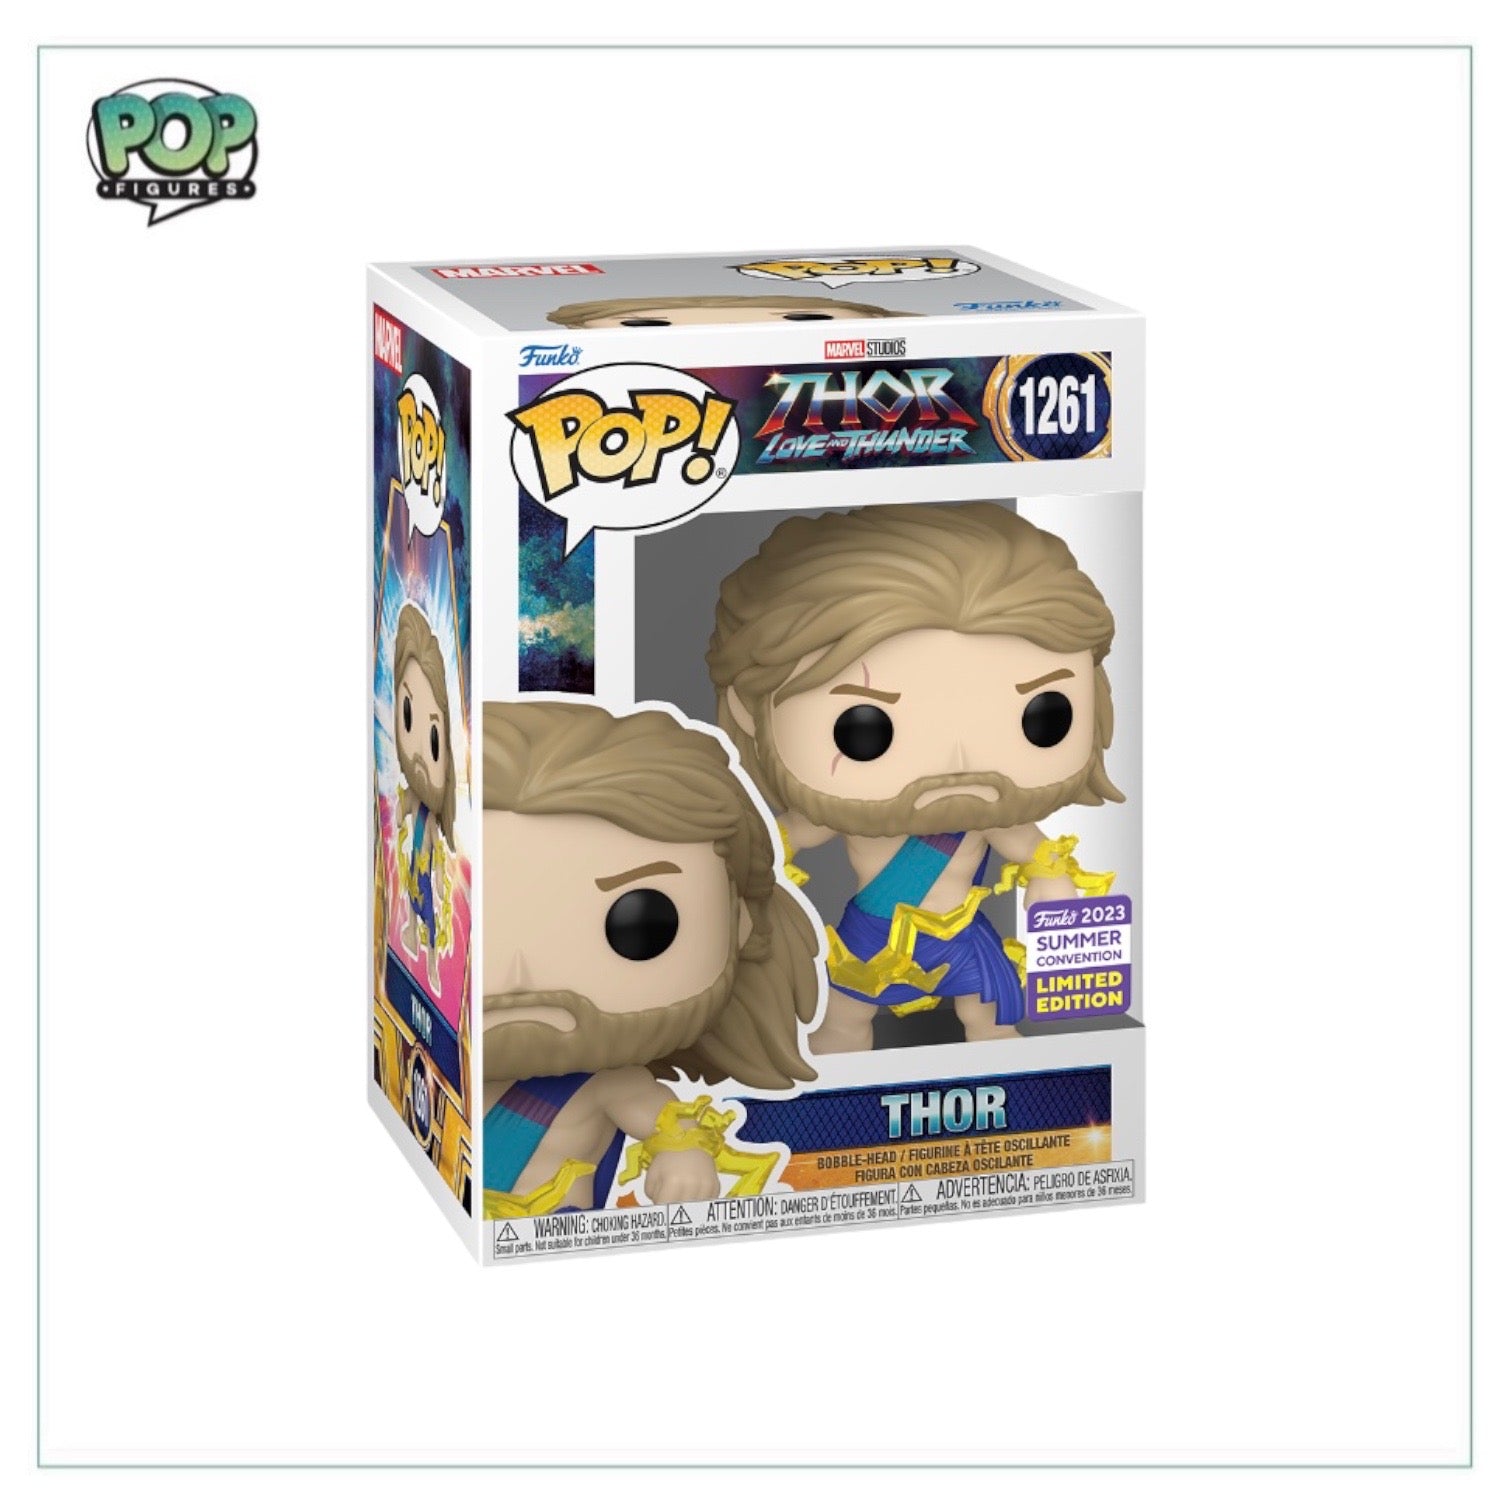 Thor #1261 Funko Pop! - Thor Love and Thunder - SDCC 2023 Shared Exclusive